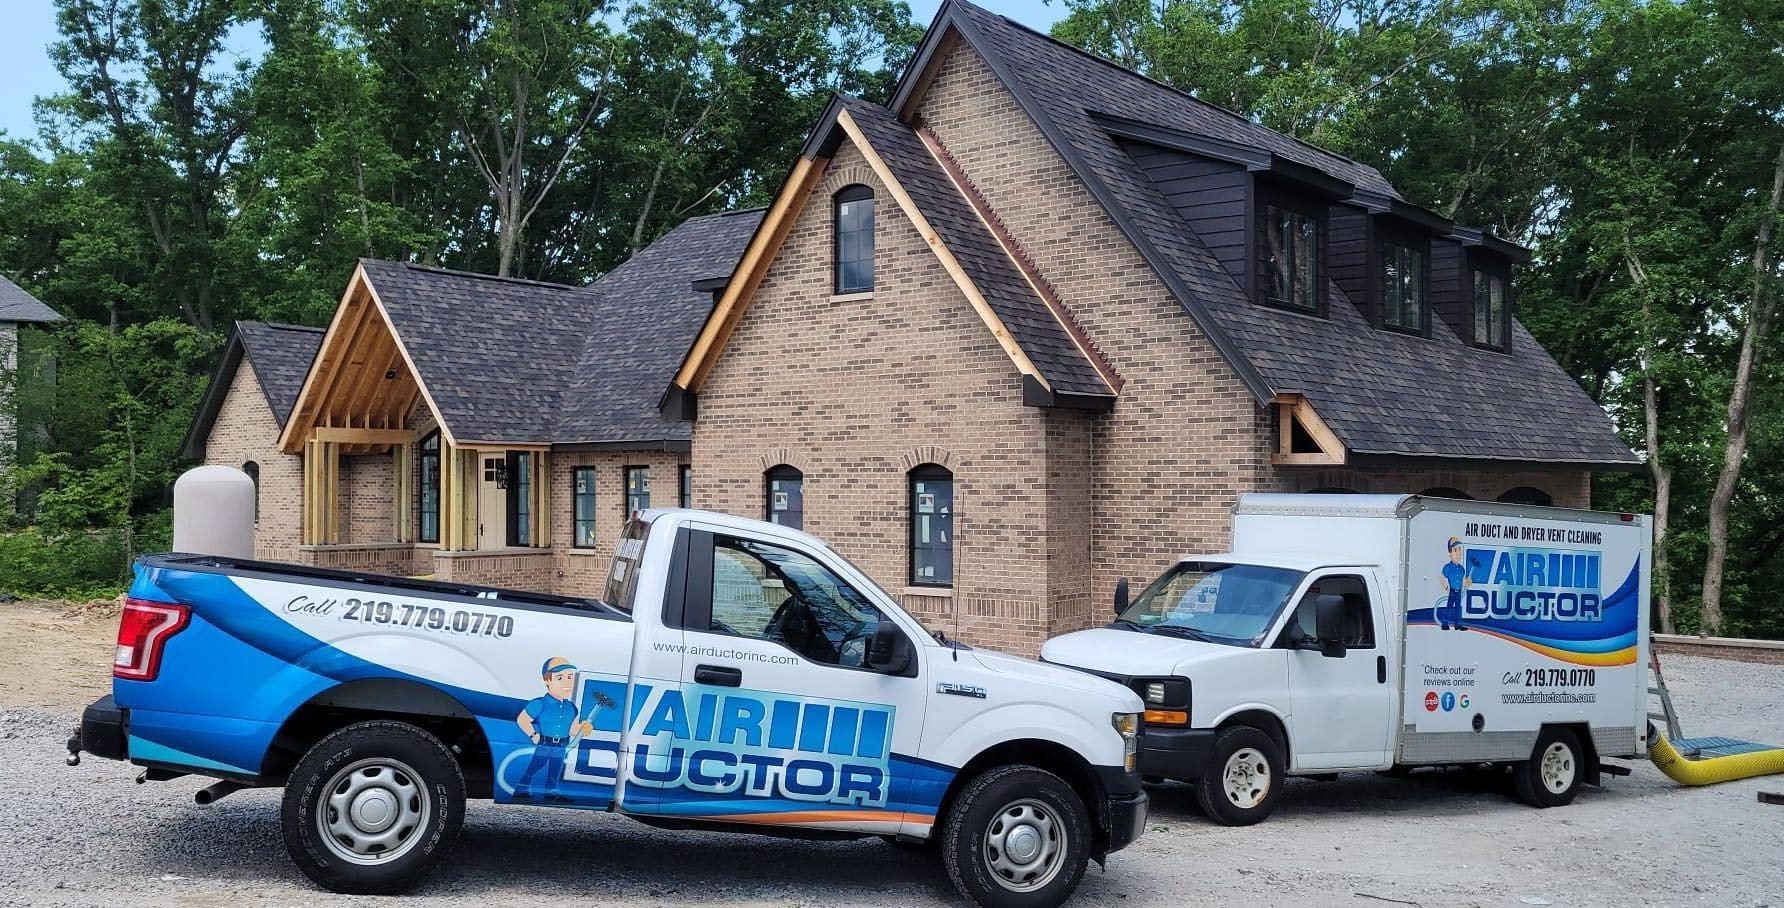 Air Ductor Inc. Vent & Air Duct Cleaning in NW Indiana & South Suburbs